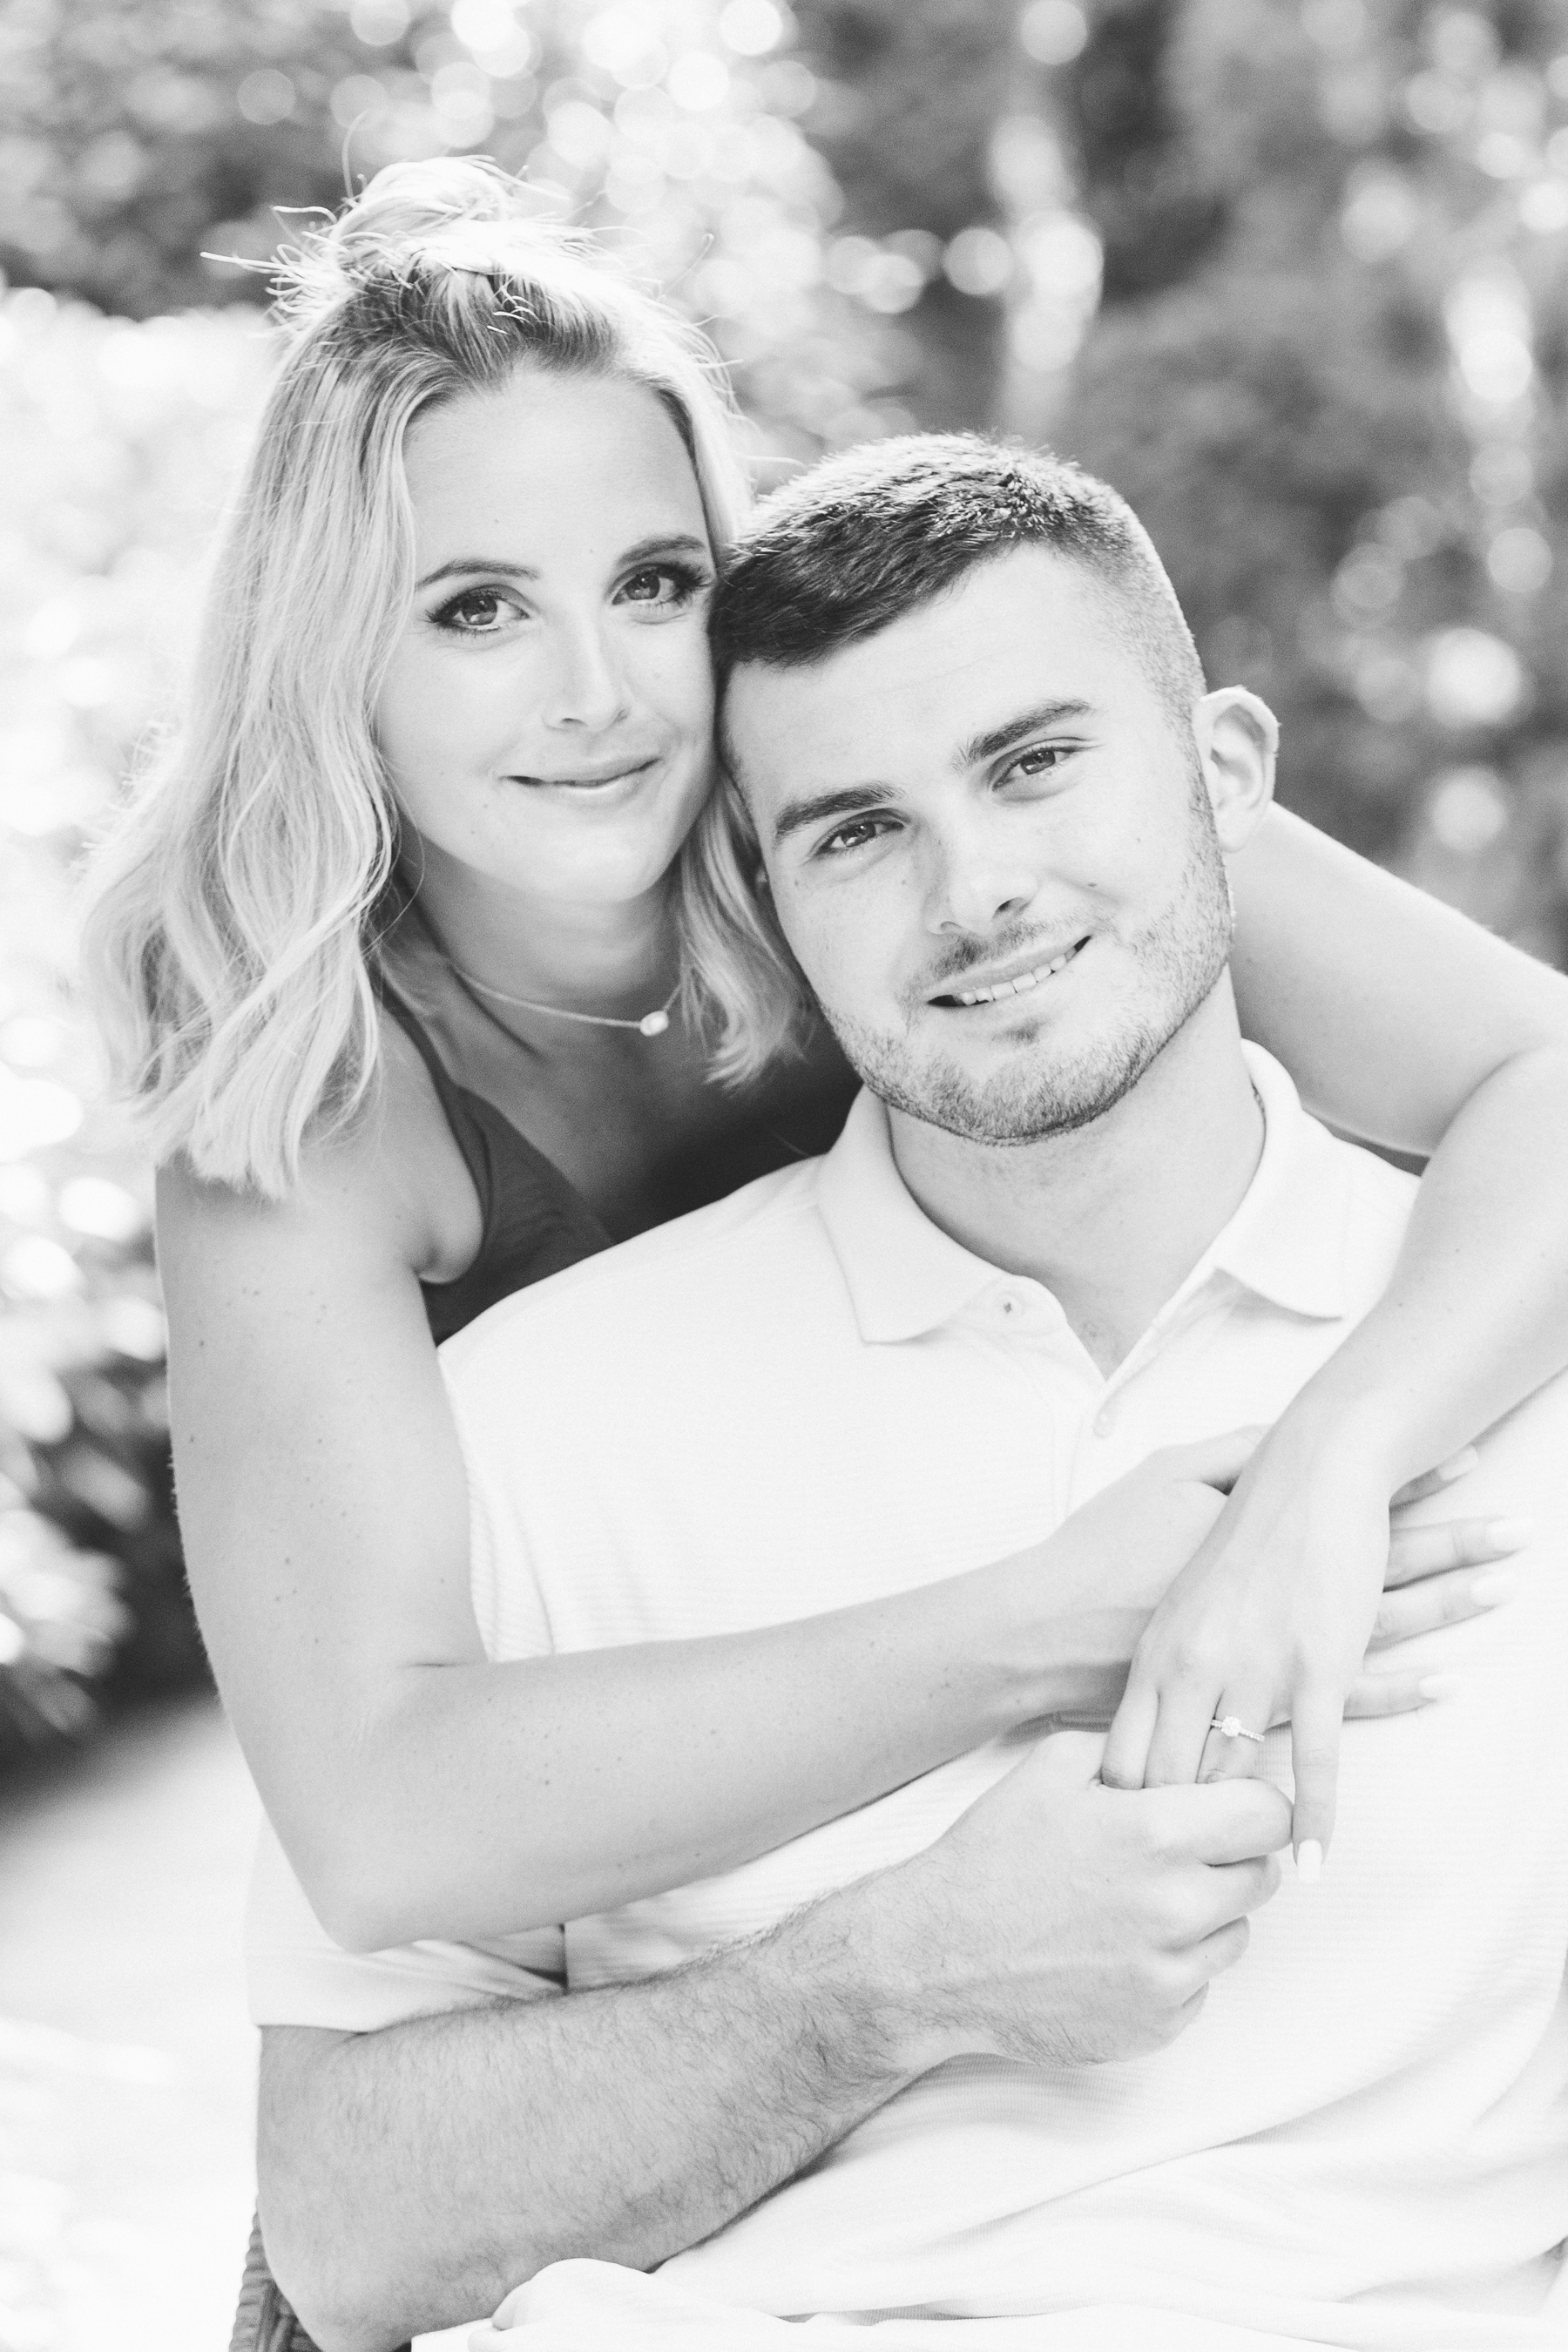 I love the texture in this black and white engagement portrait!